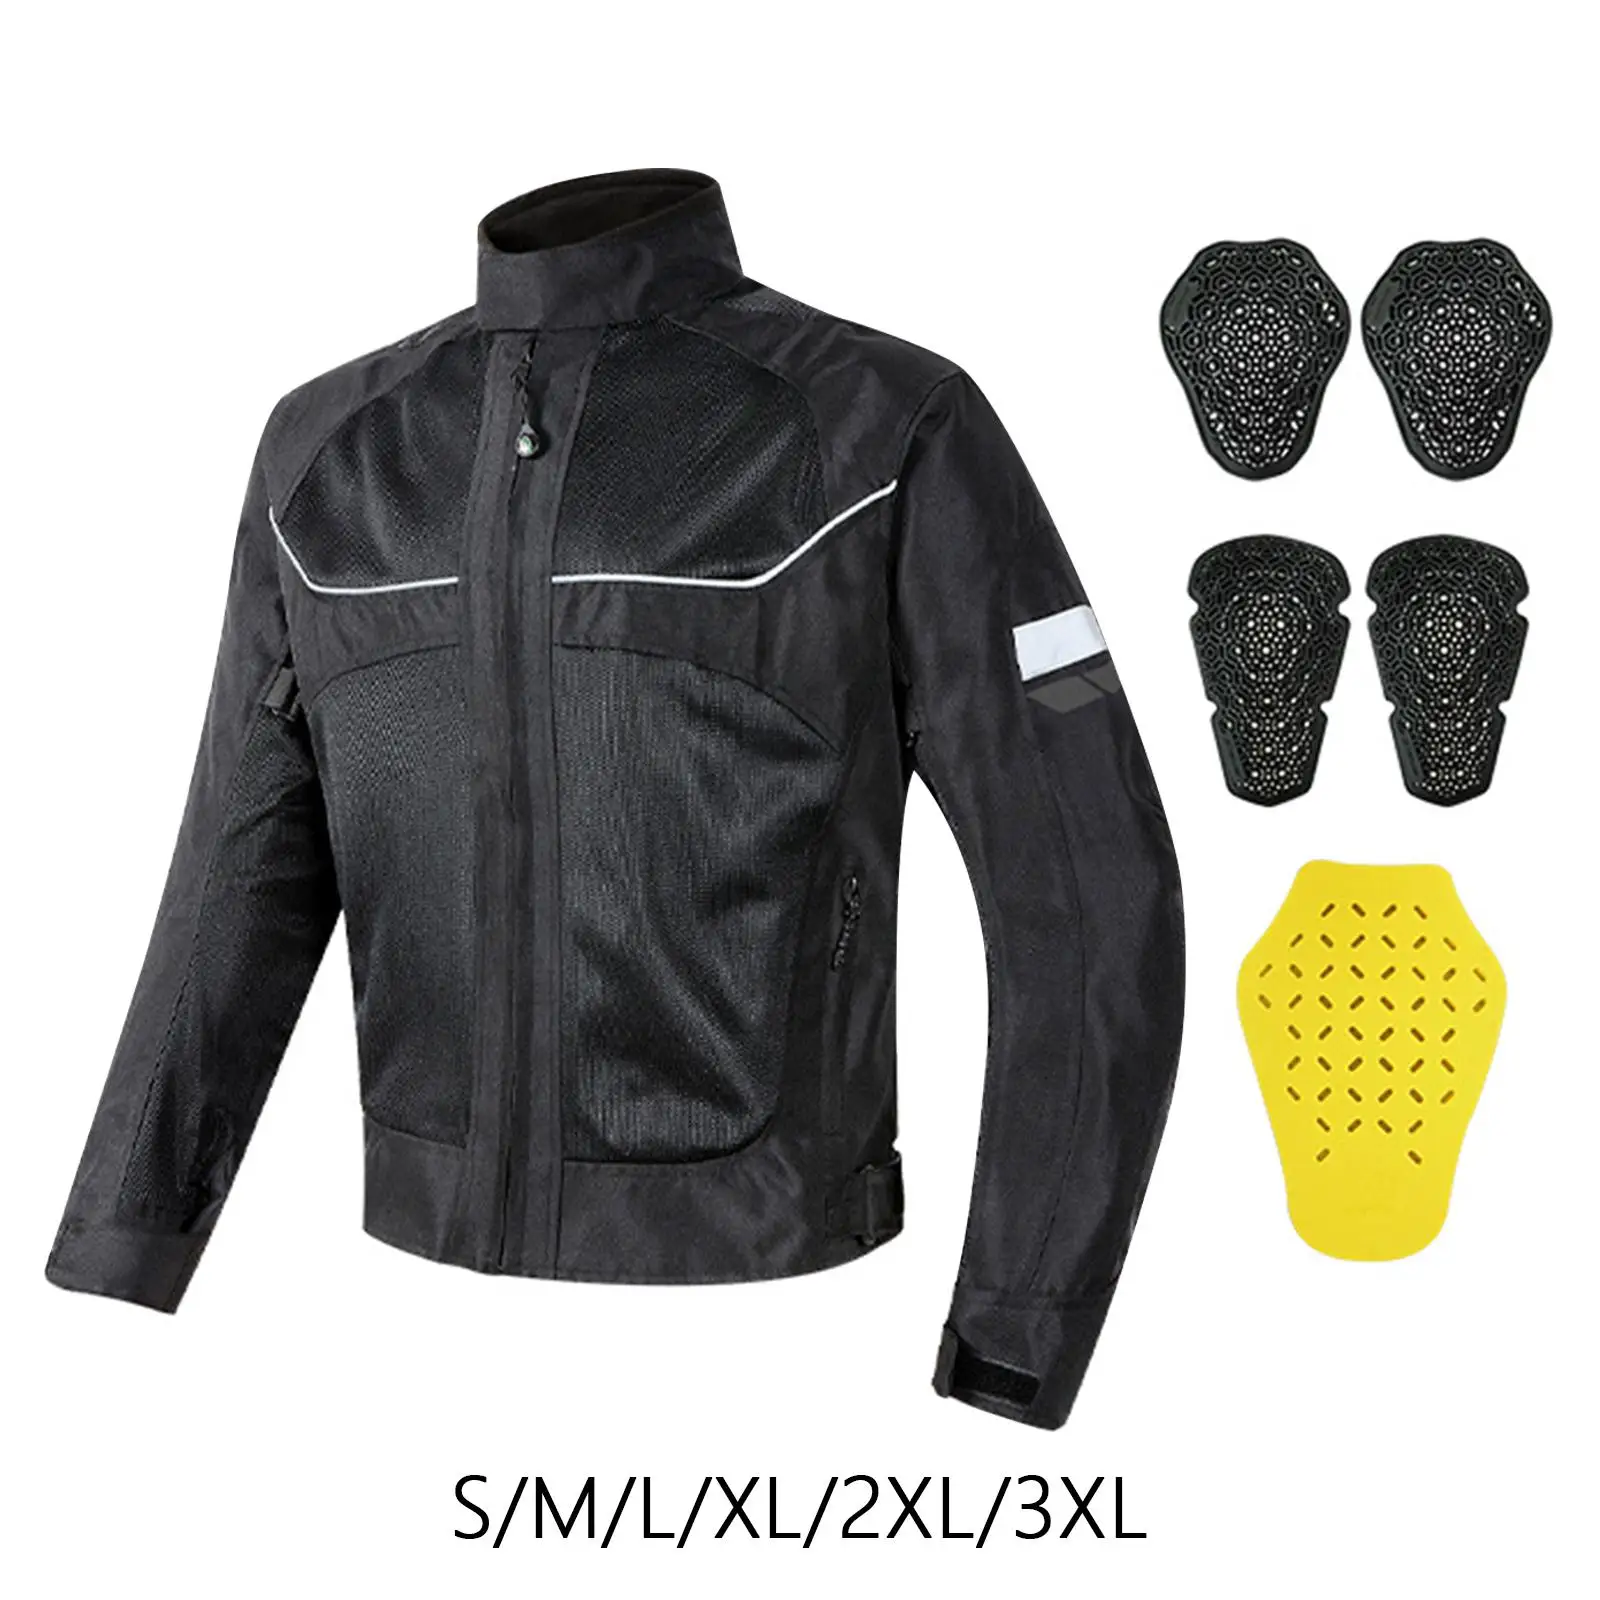 Motorcycle Riding Jacket, Protective Gear Coat Breathable Mesh Reflective